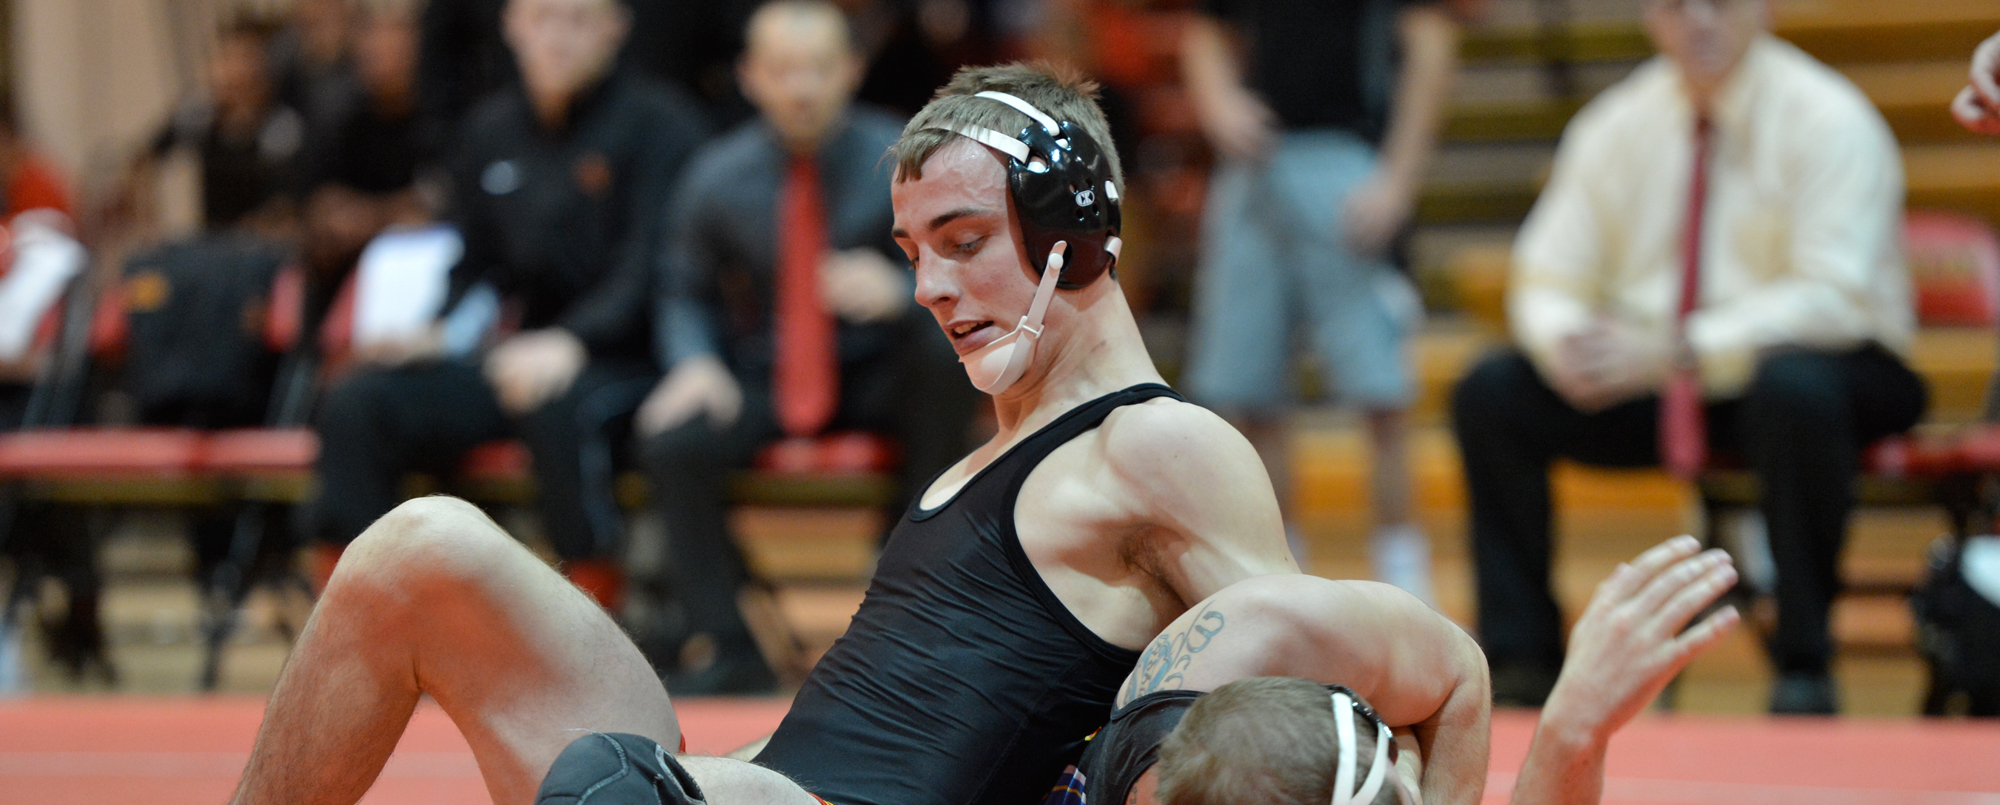 Storm fall to No. 11 Cornell in outdoor dual